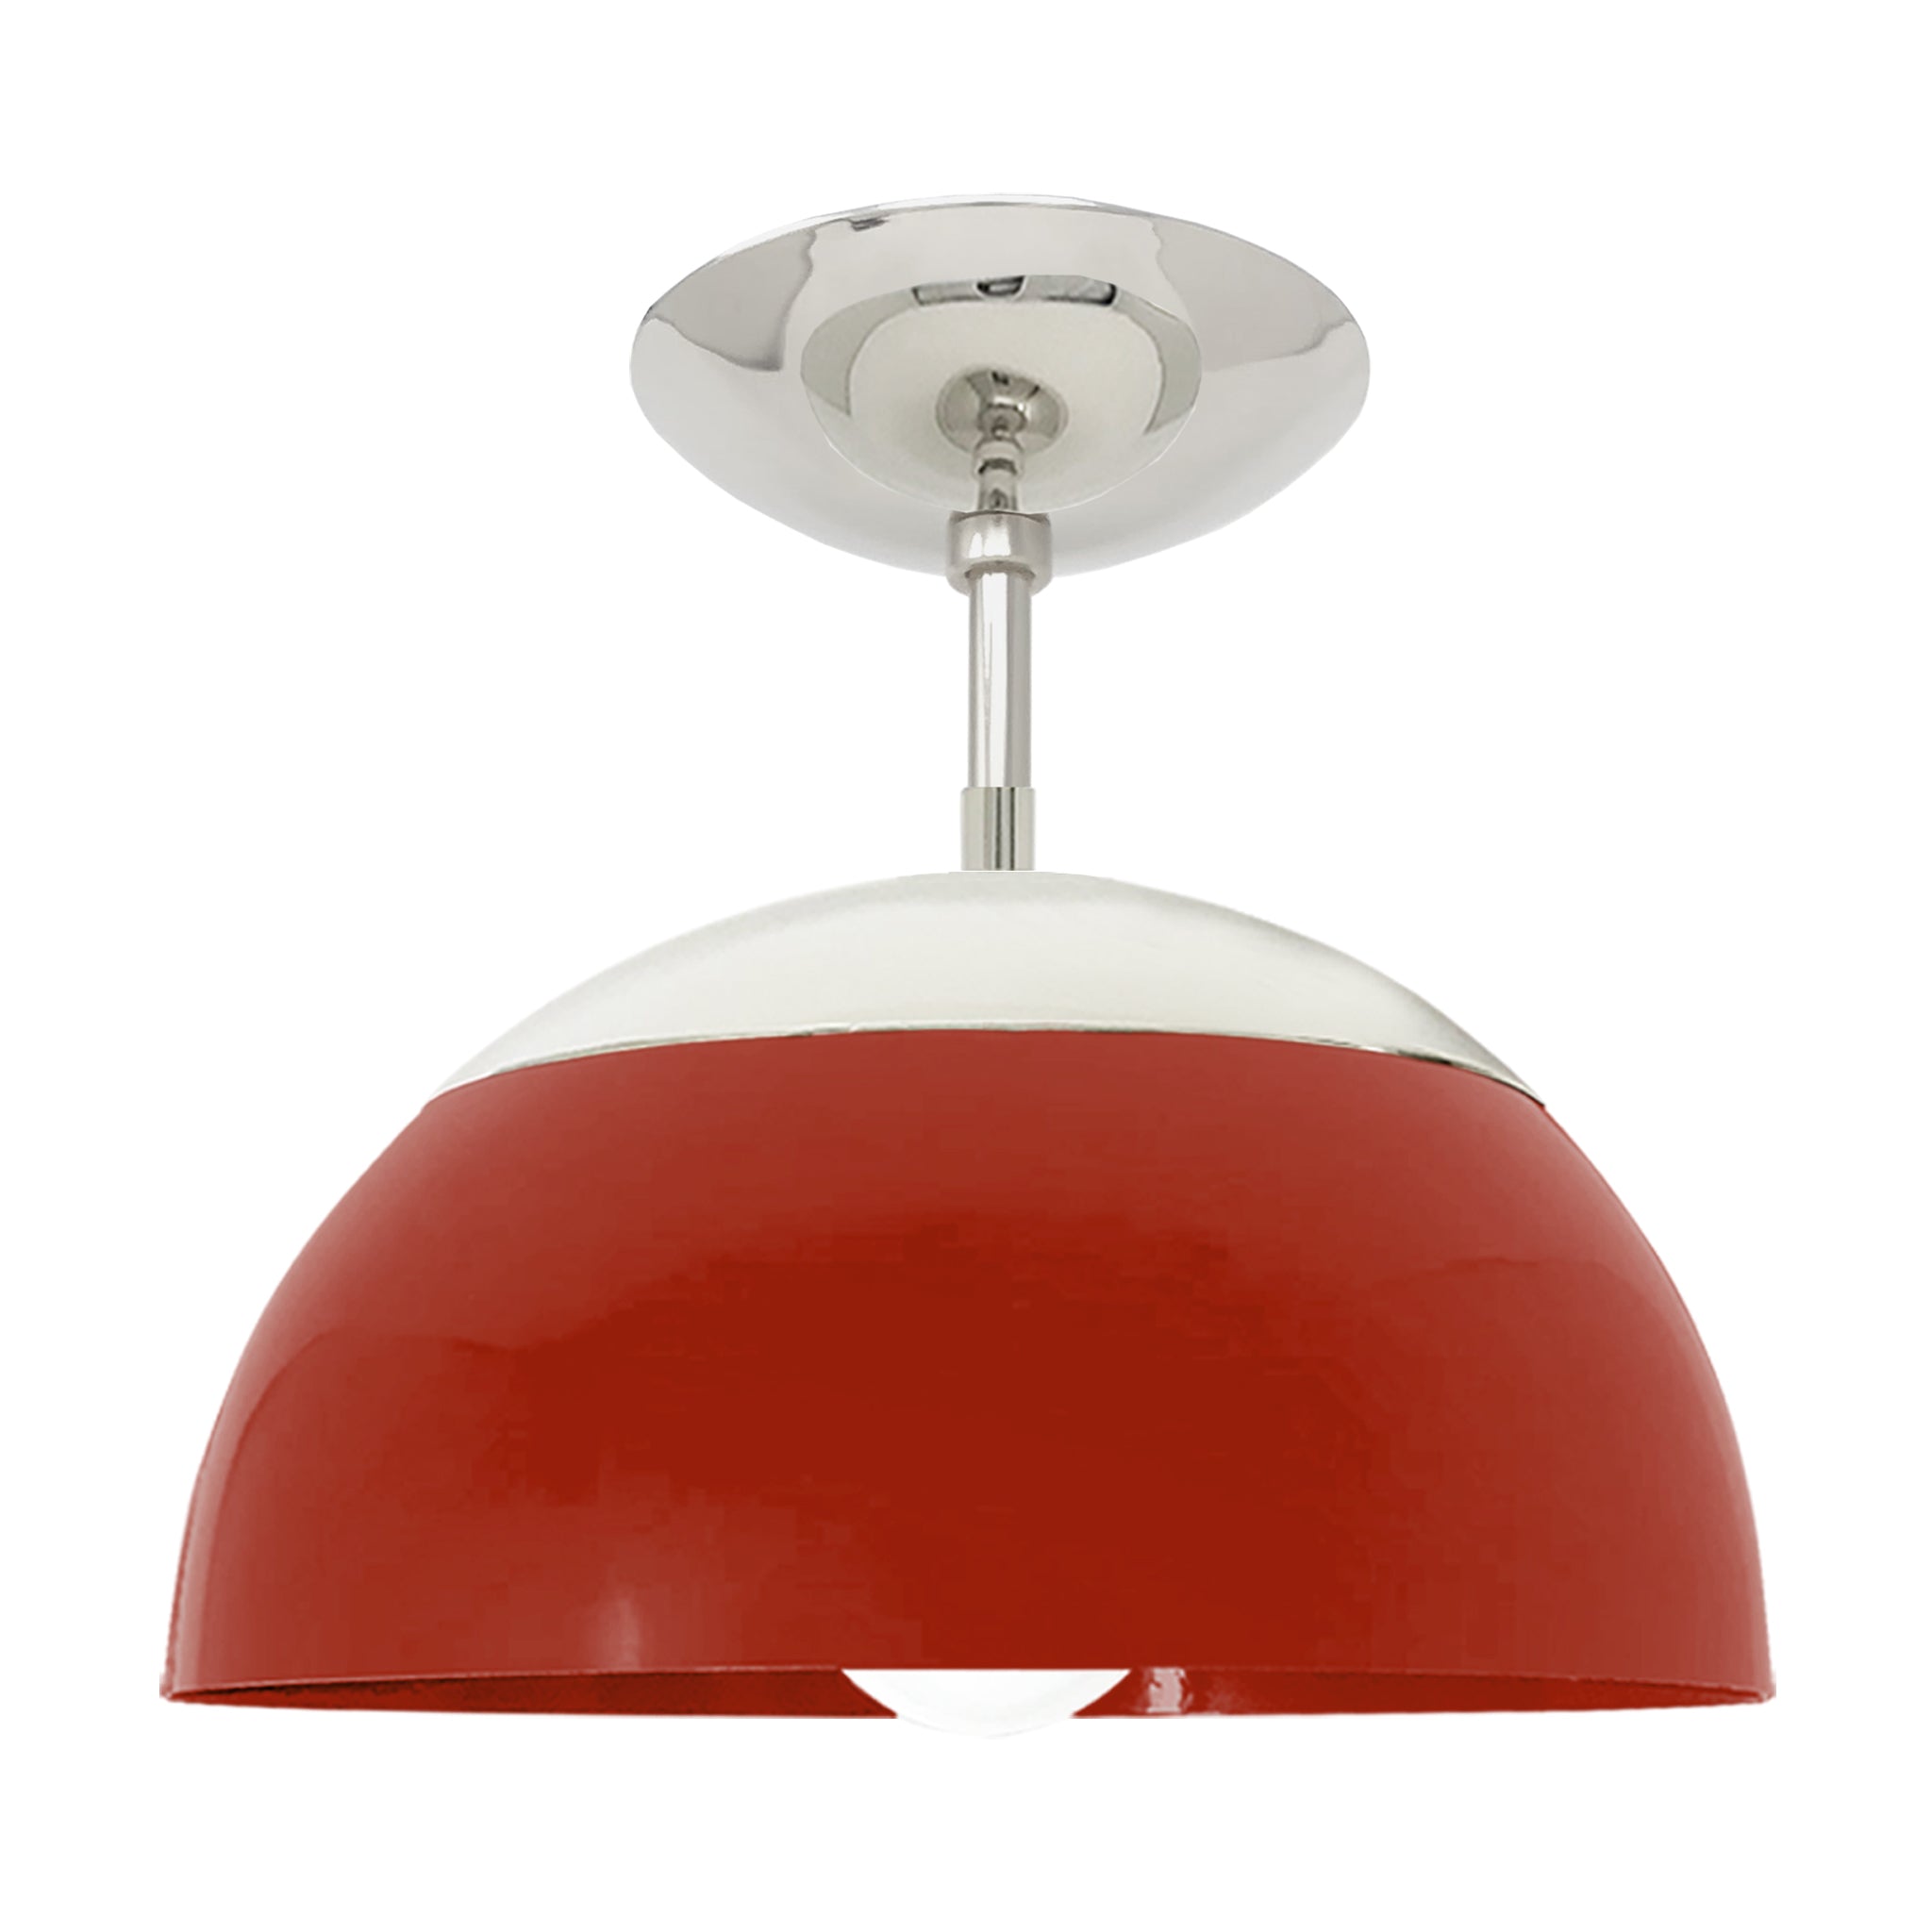 Nickel and riding hood red color Cadbury flush mount 12" Dutton Brown lighting